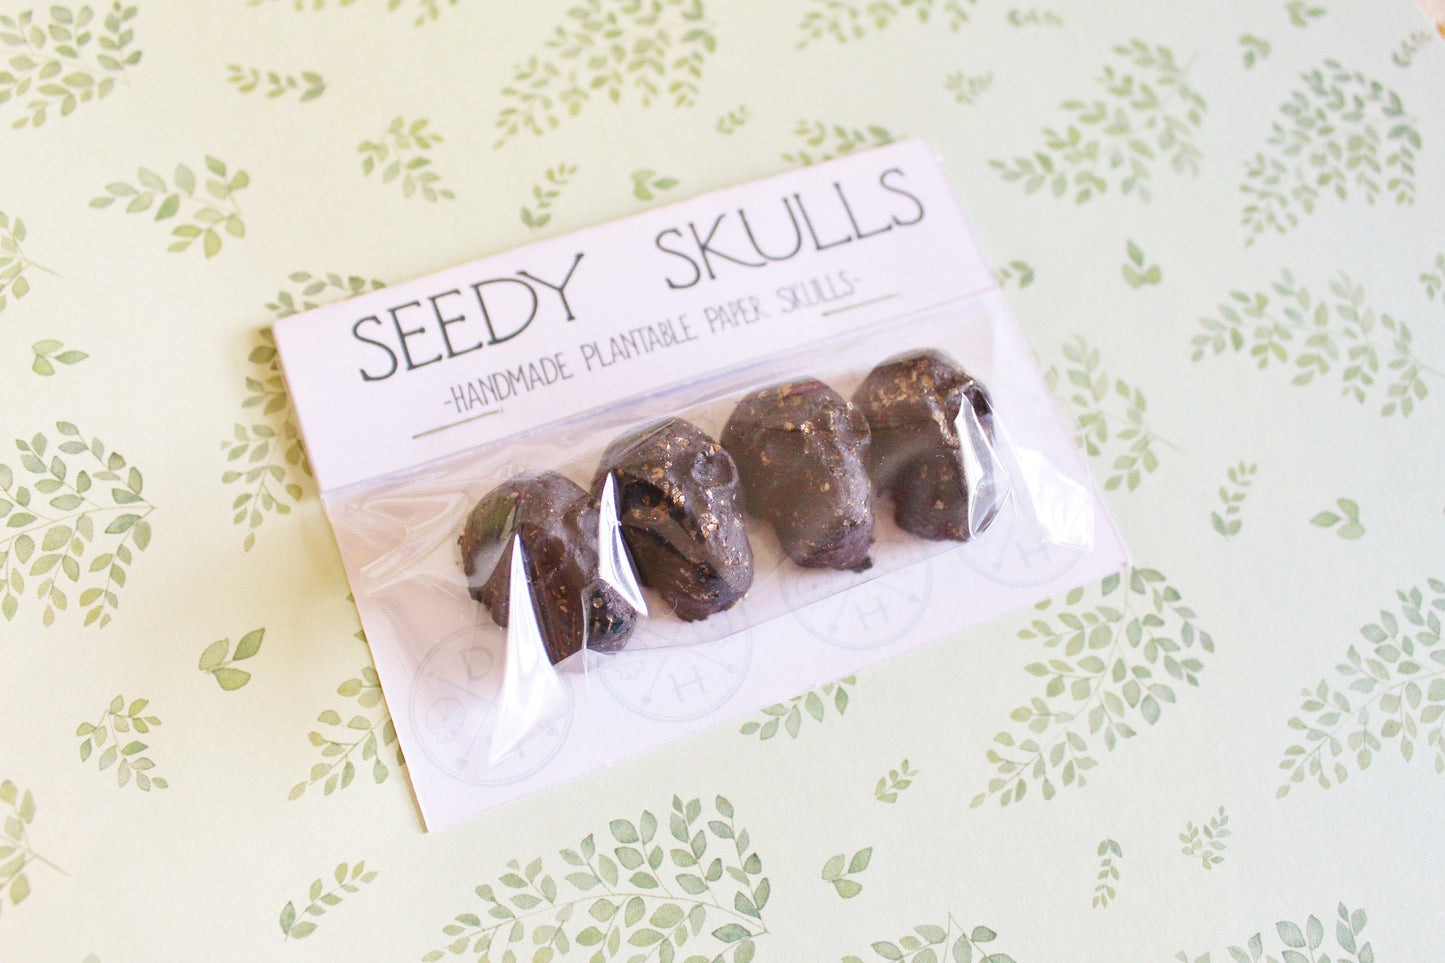 Black Plantable Paper Skulls / Seed Bombs / Seedy Skulls Pack / Recycled Paper Pulp Craft / Spring Summer Small Gift / Wild Flowers